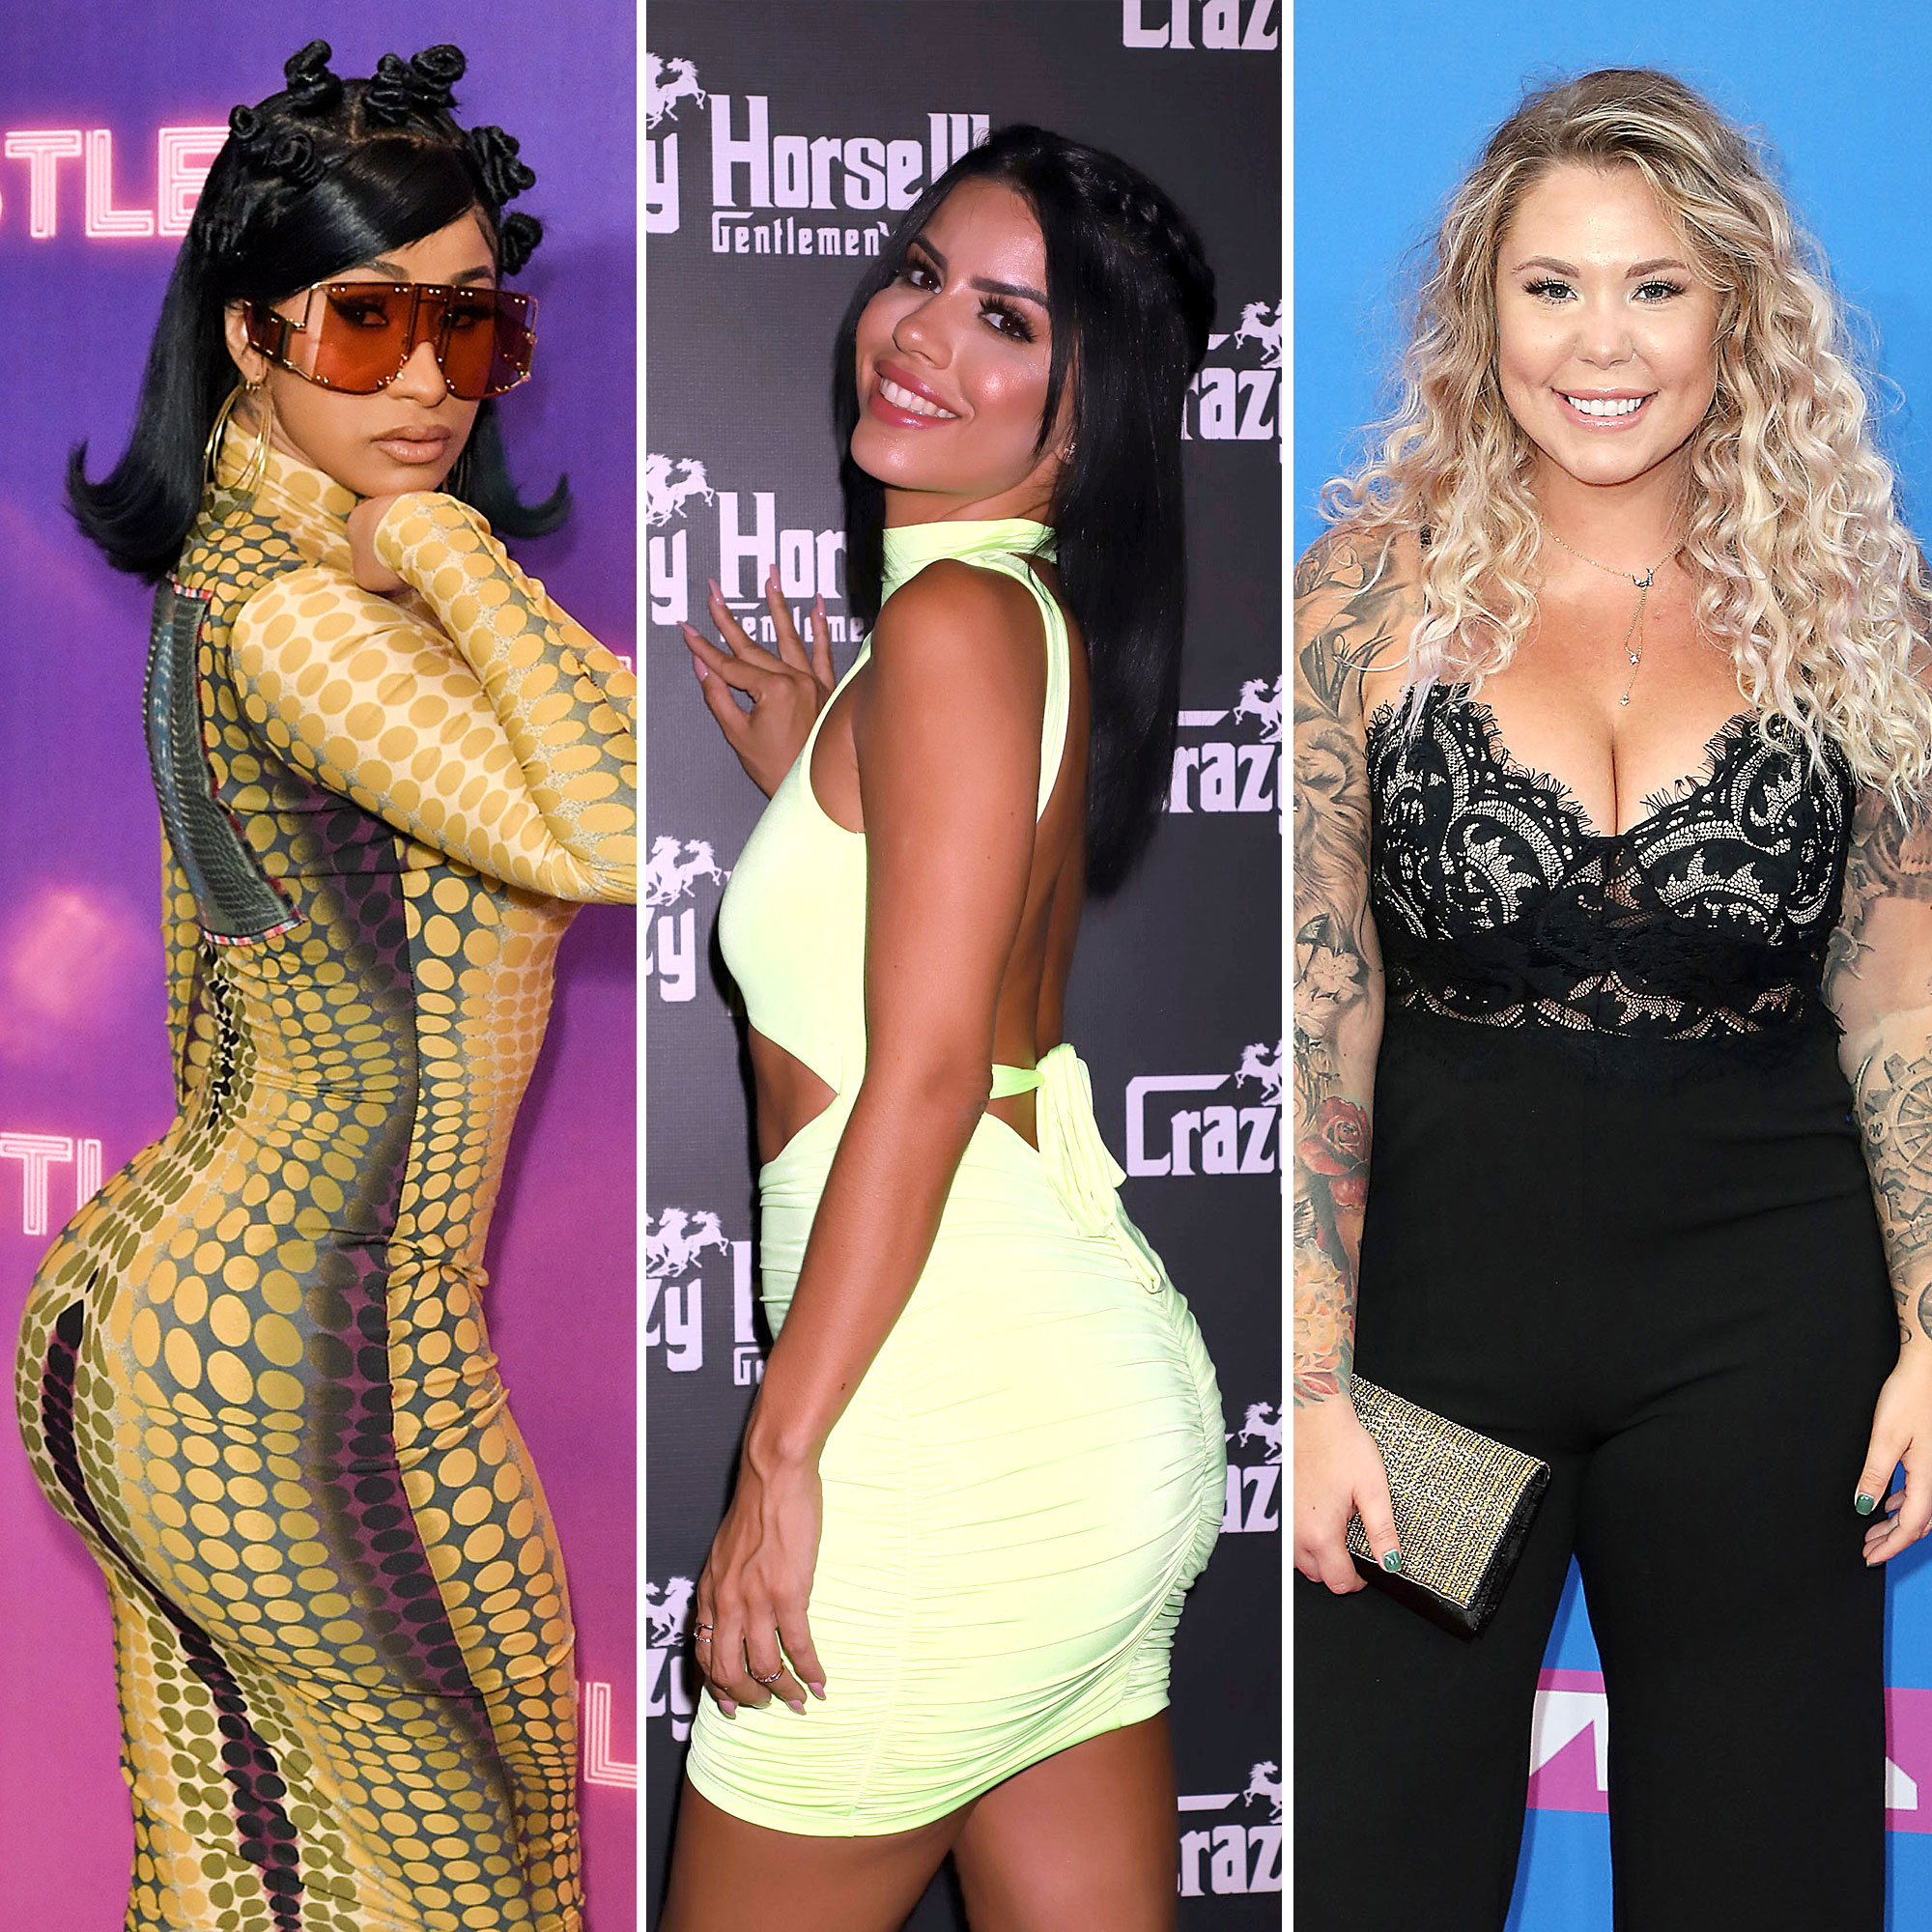 Find Cheap, Fashionable and Slimming brazilian girl butts 